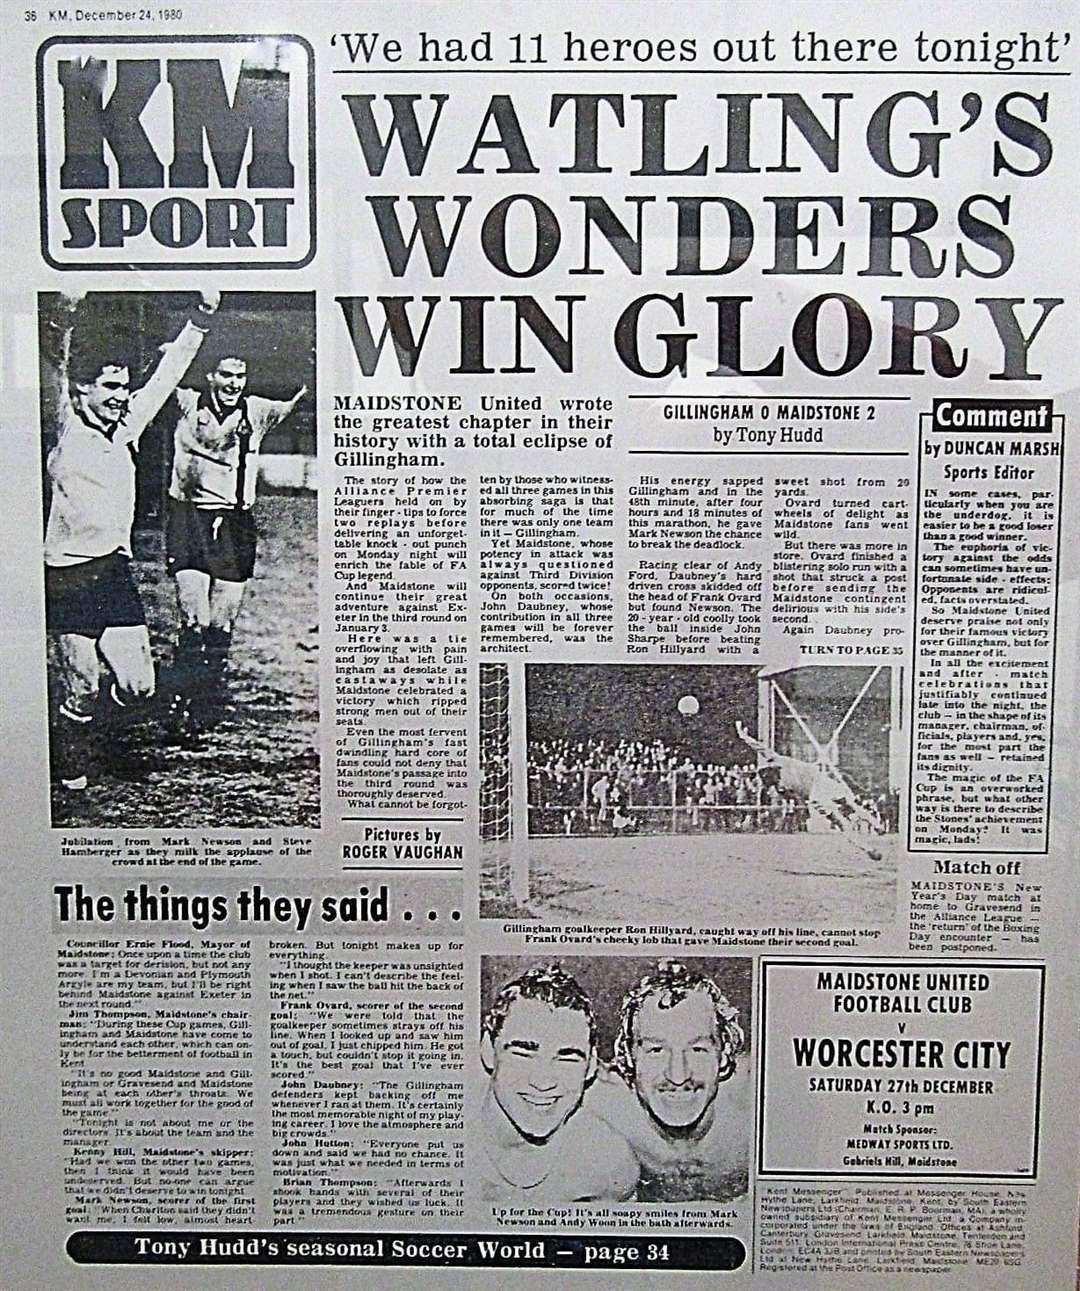 The Kent Messenger report of Maidstone's FA Cup win over Gillingham